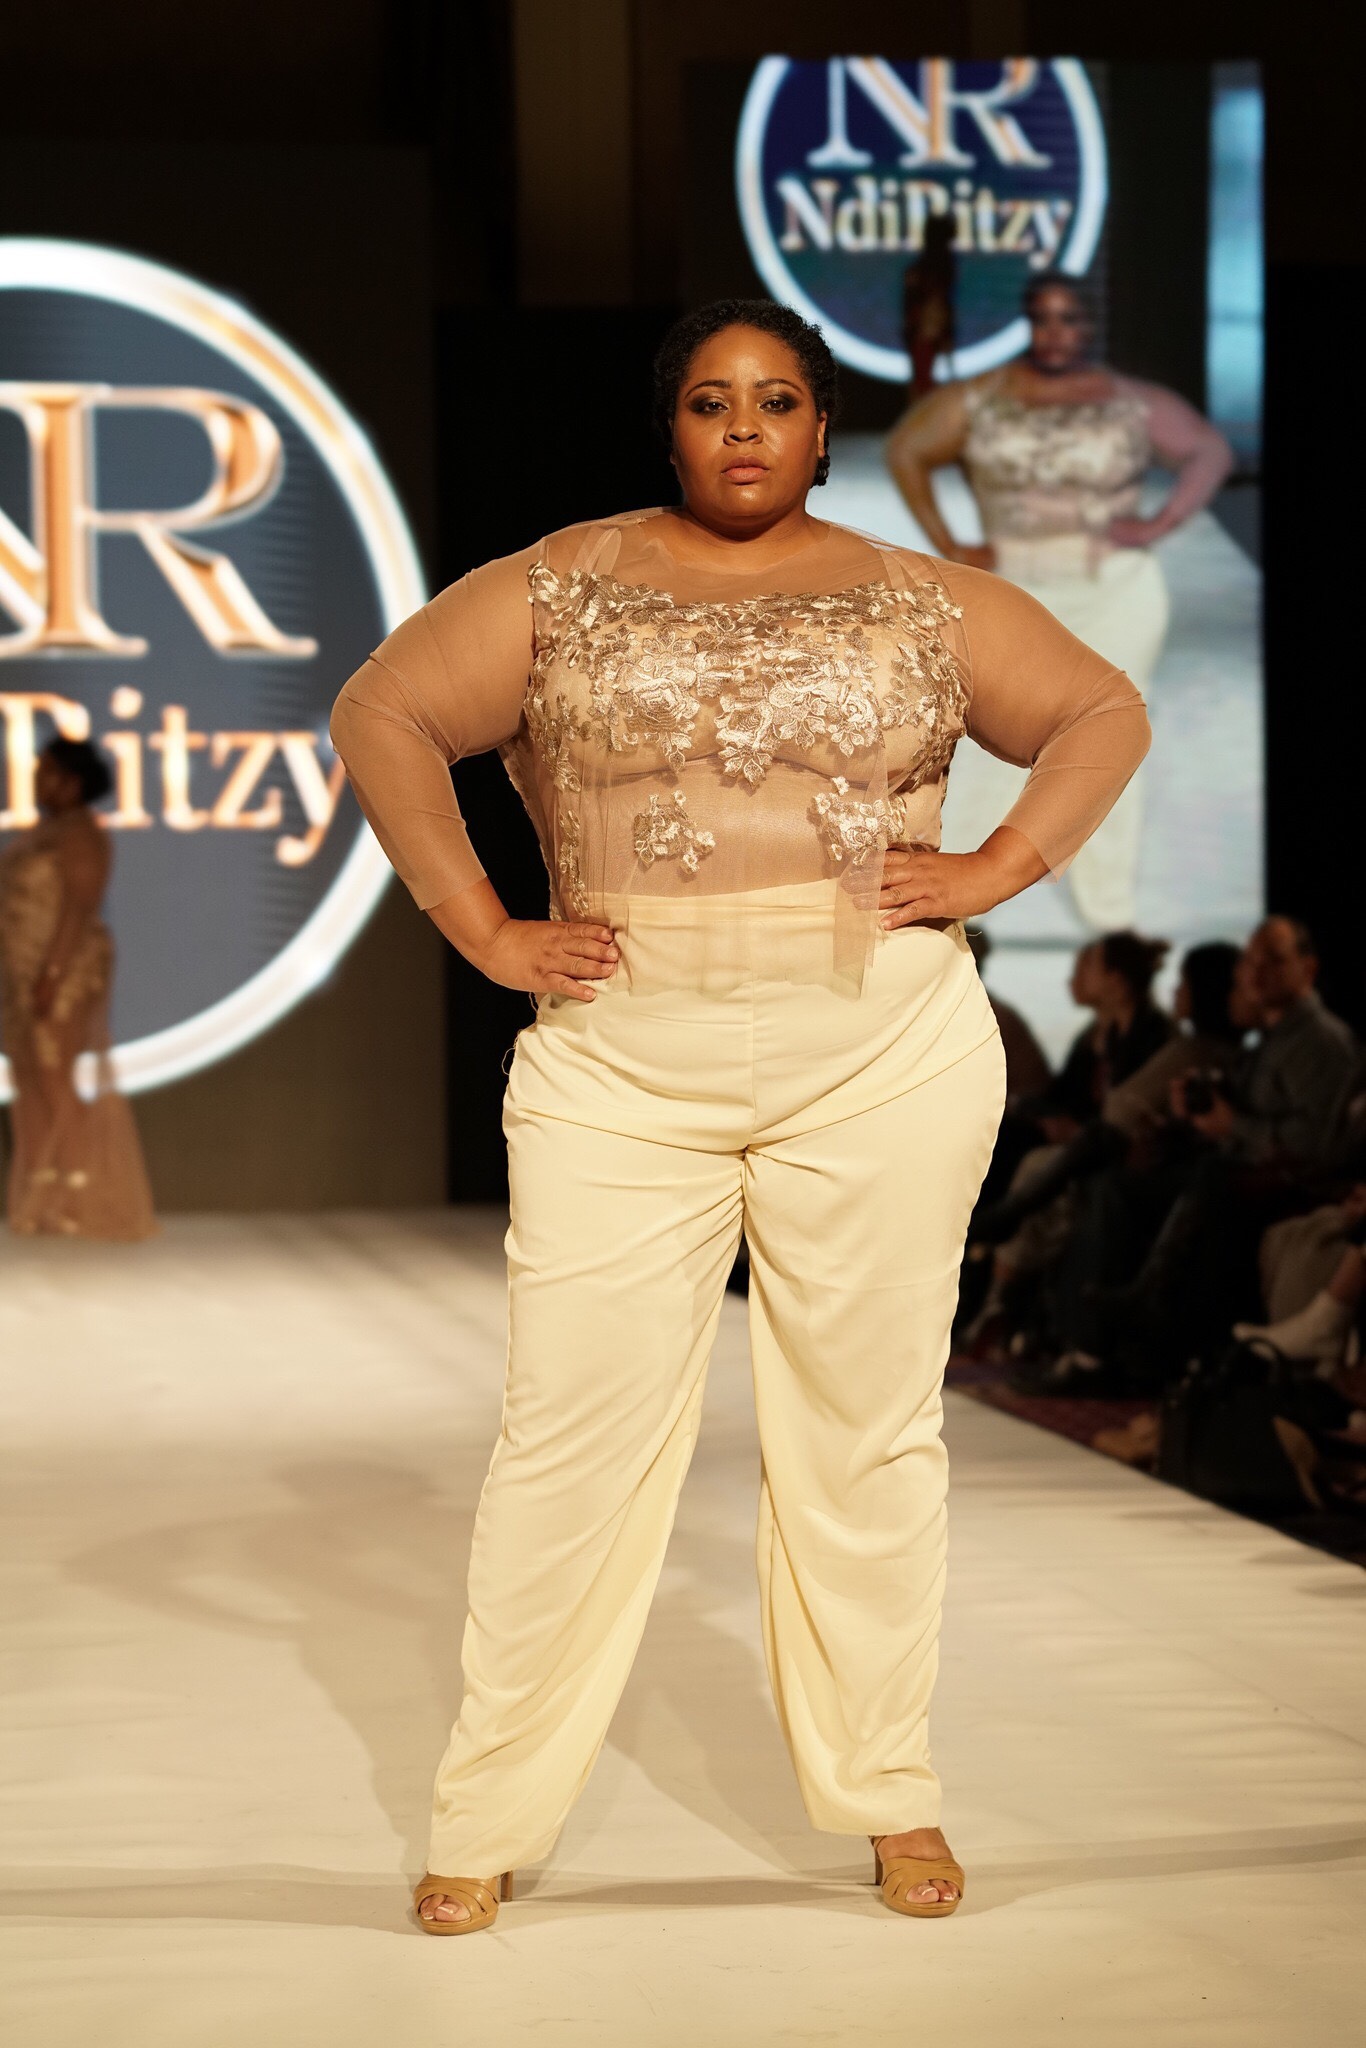 Plus Size Couture Crop top and Pant - Ndiritzy